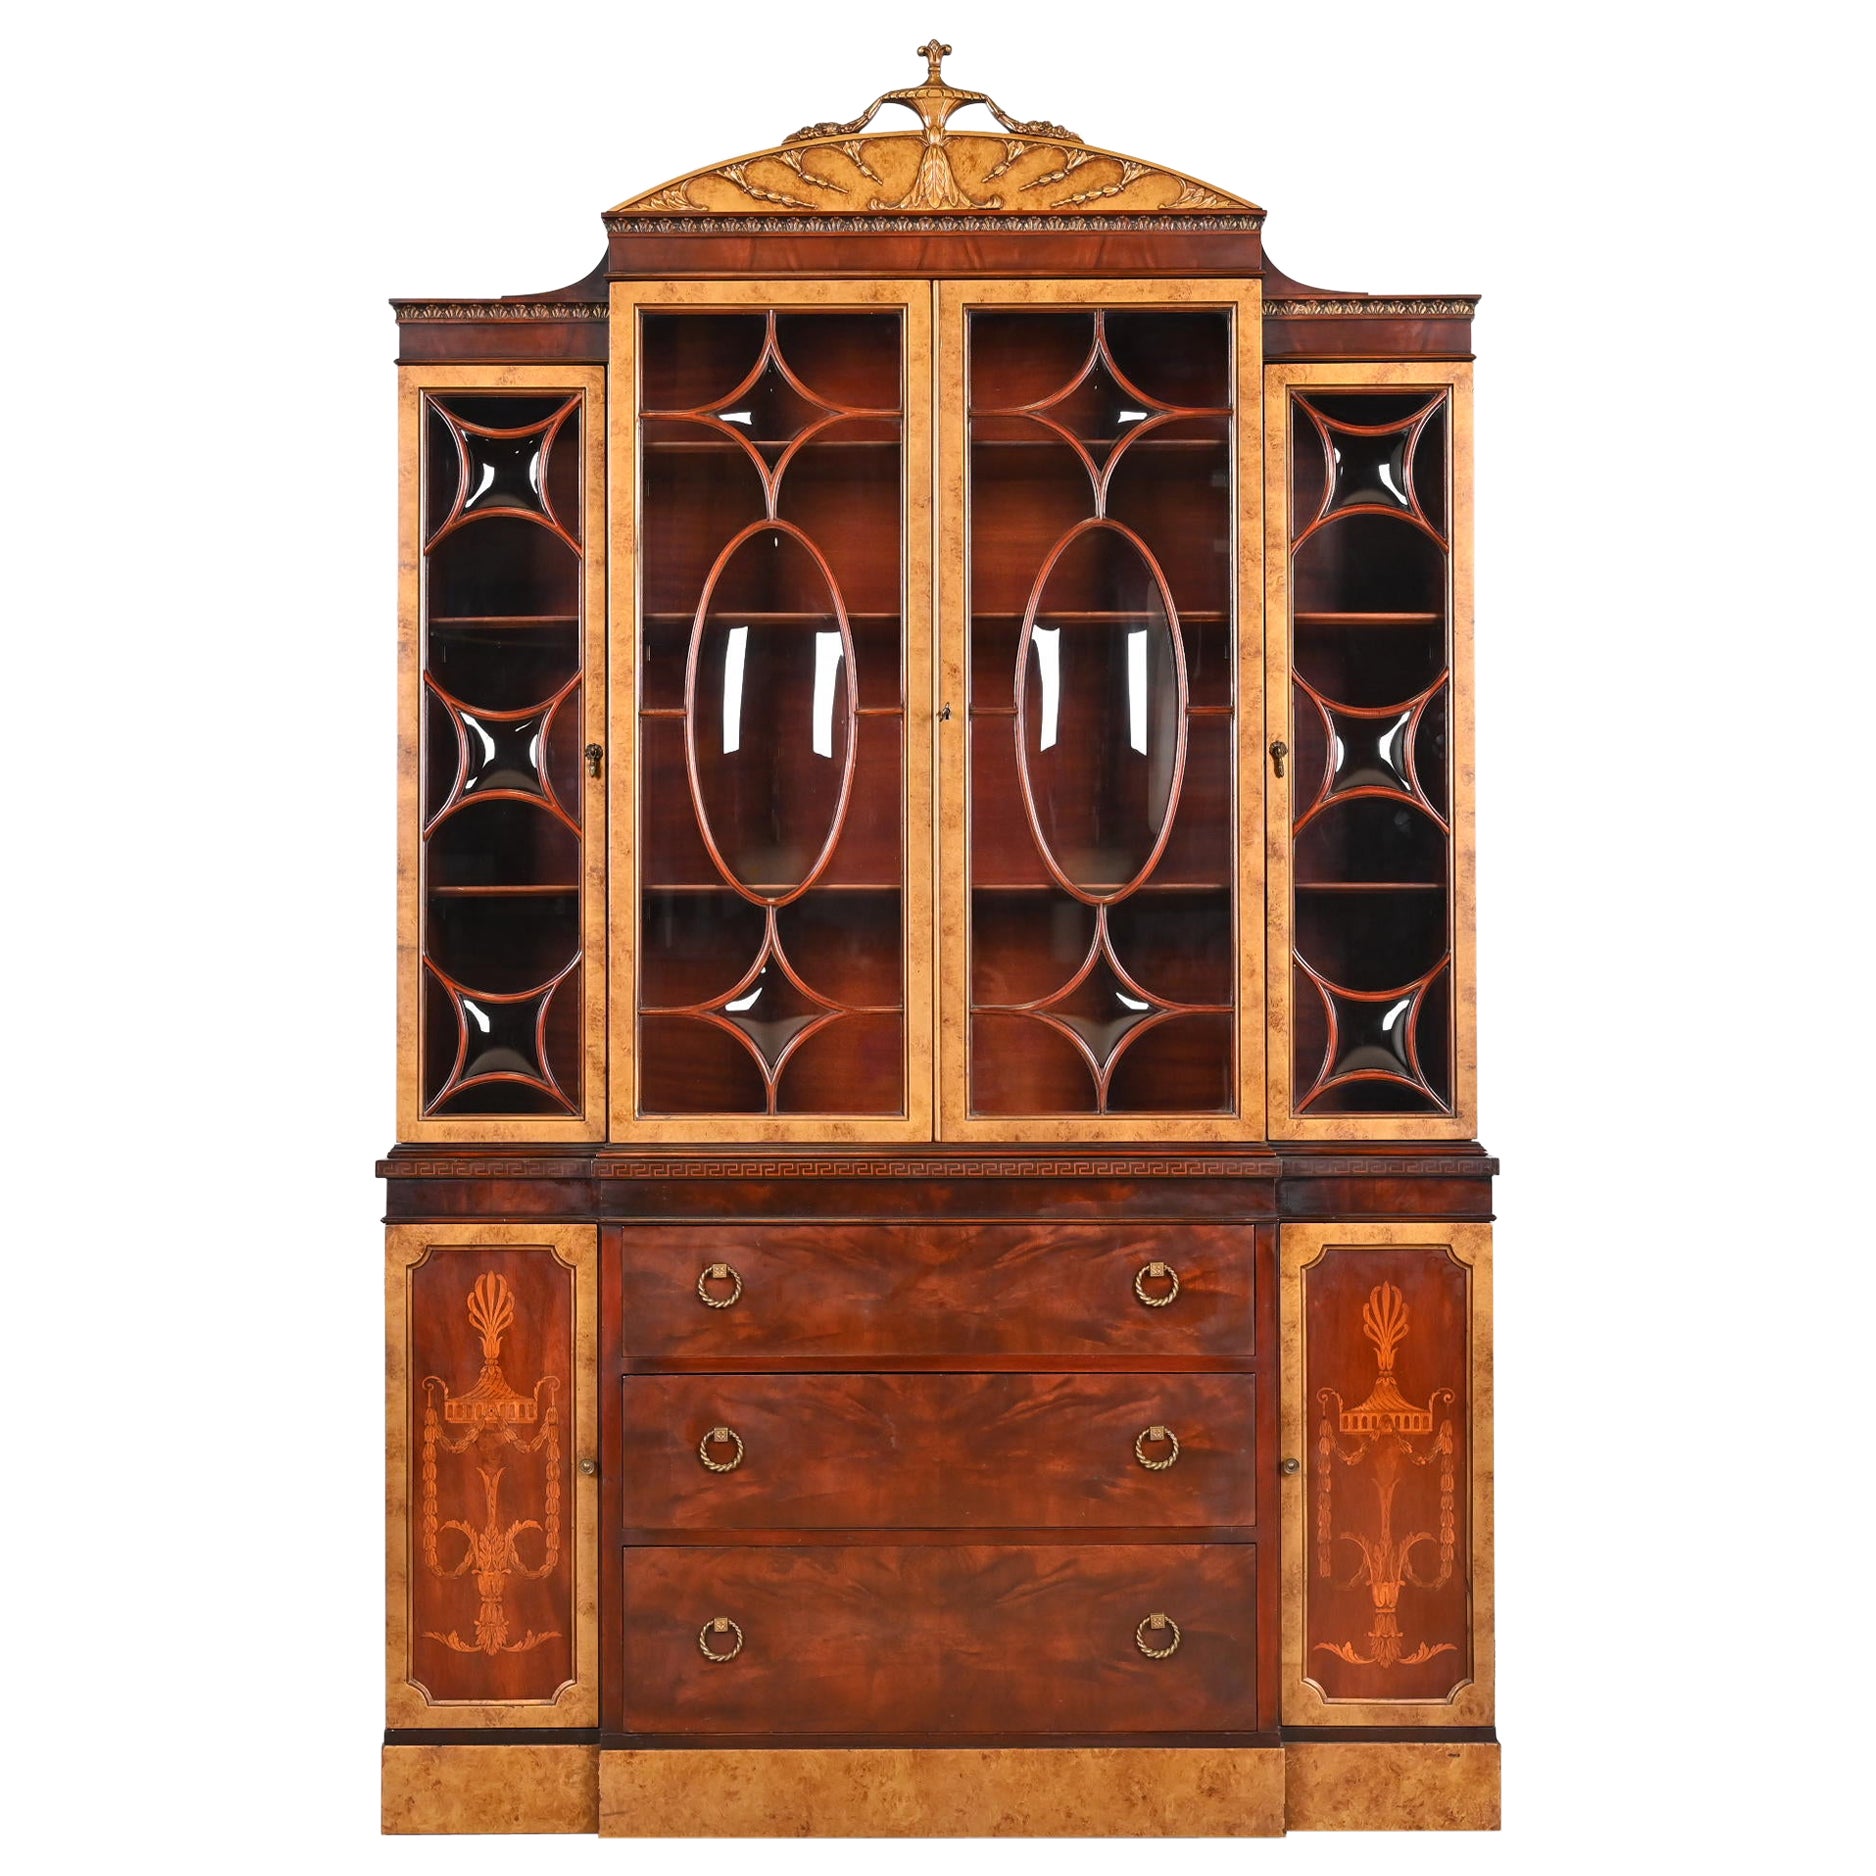 Romweber French Neoclassical Mahogany and Burl Wood Breakfront Bookcase Cabinet